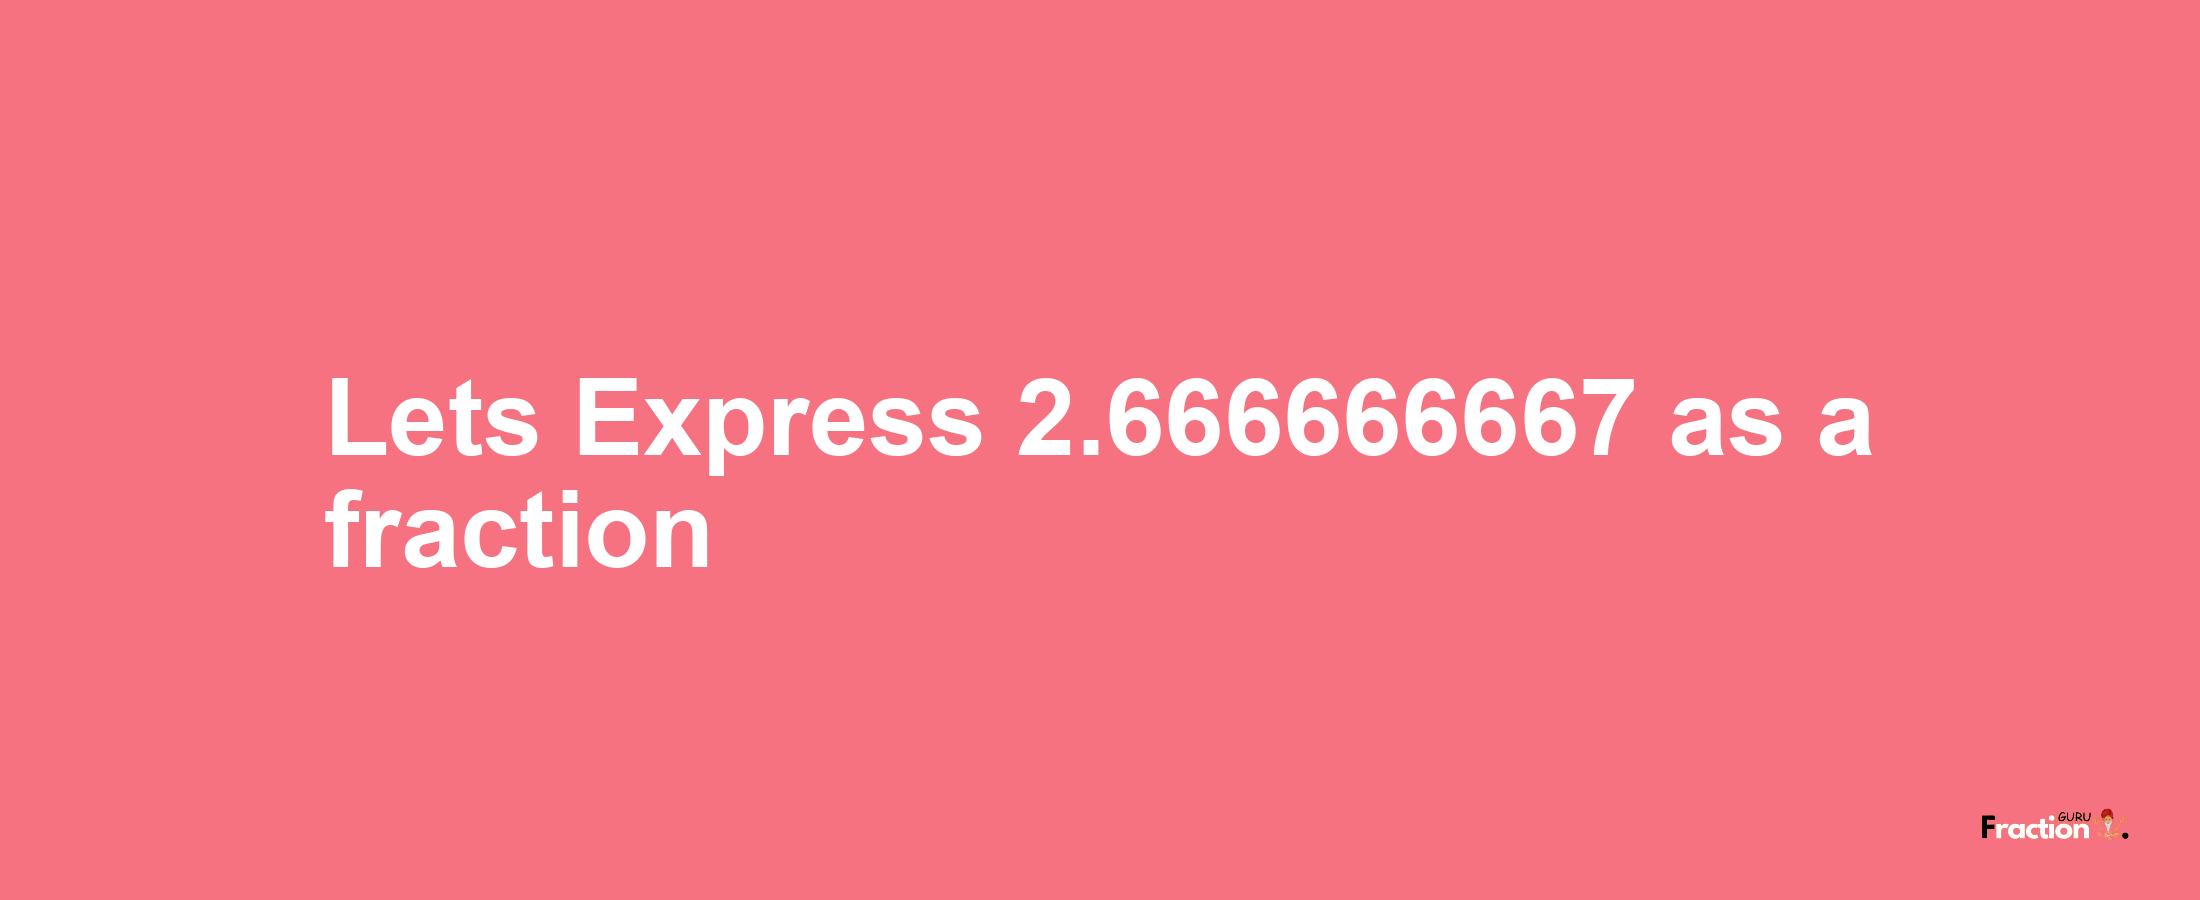 Lets Express 2.666666667 as afraction